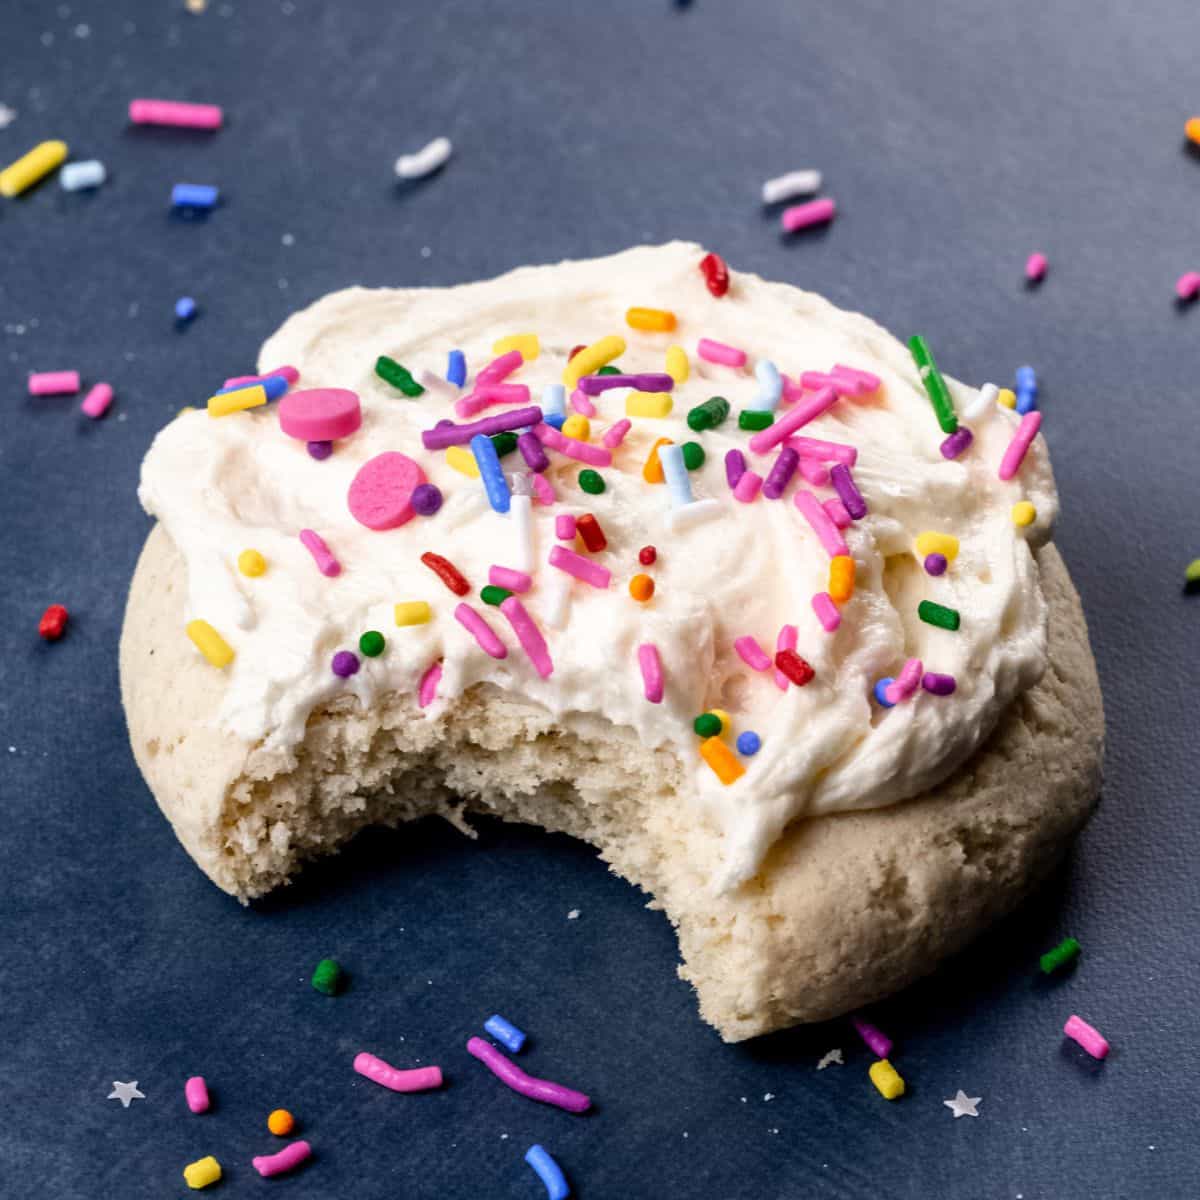 single gluten free soft sugar cookie on a dark background surrounded by sprinkles with a bite taken out of the cookie